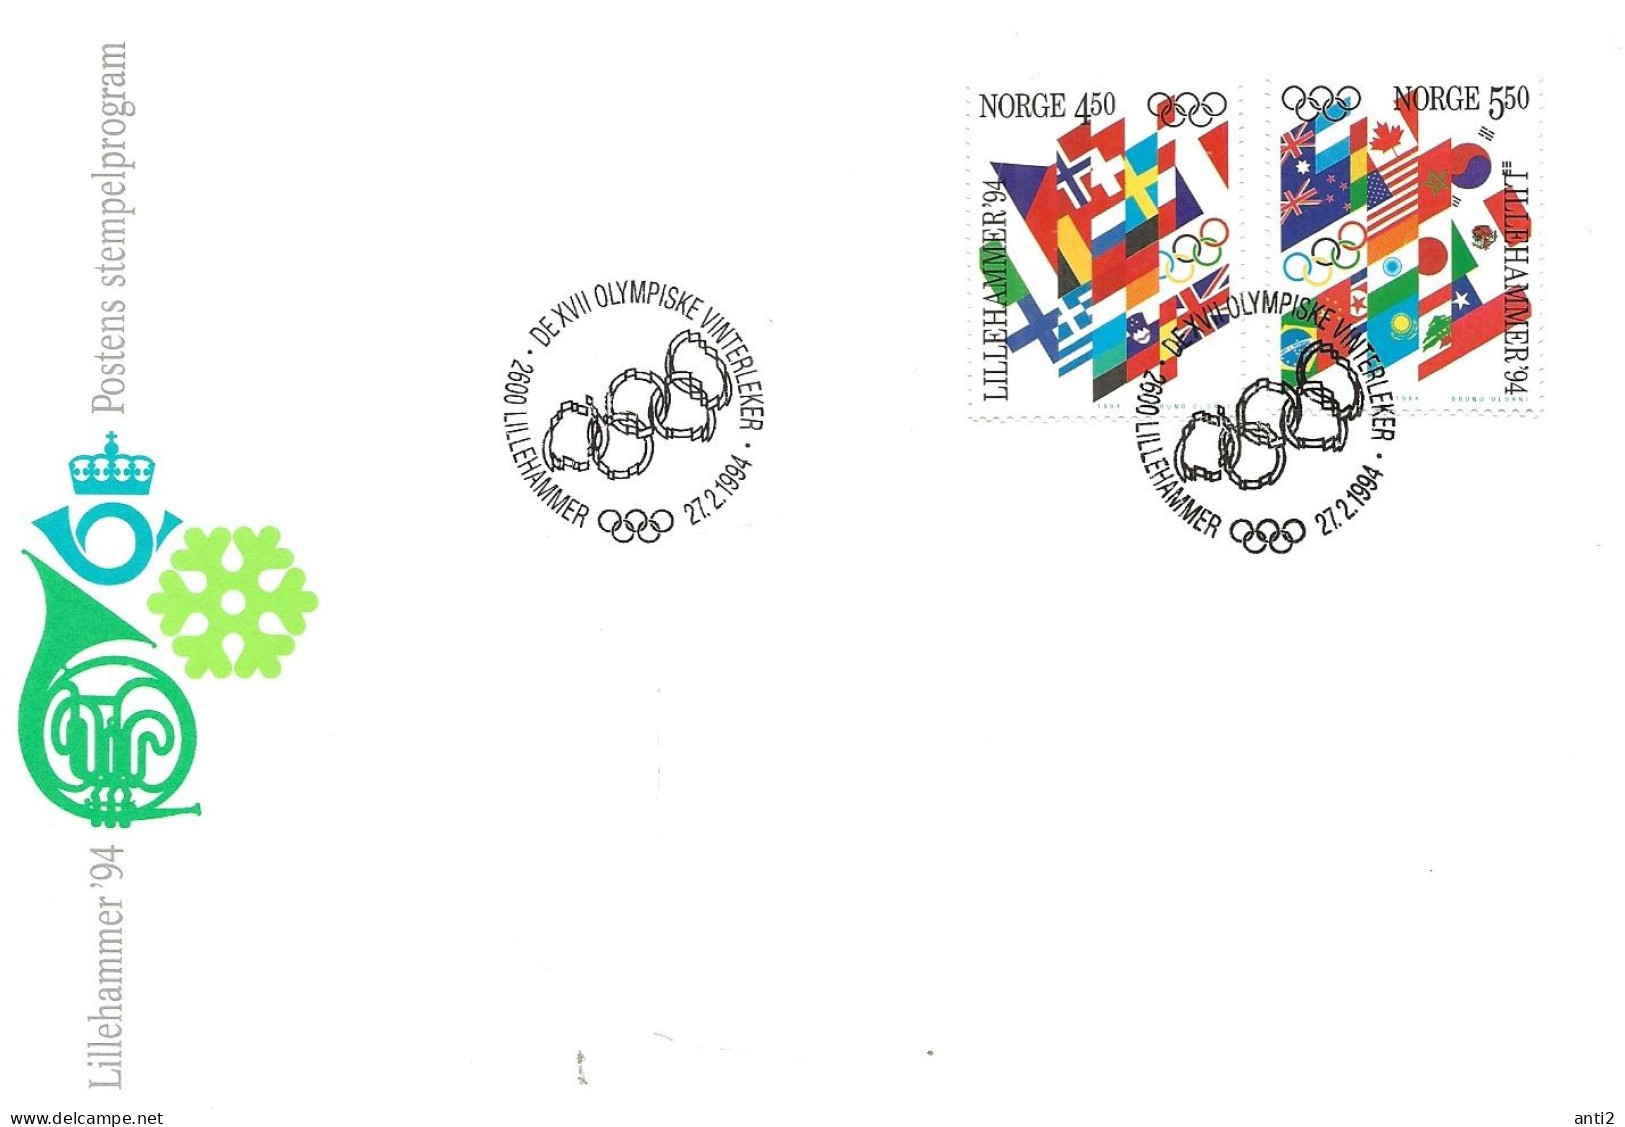 Norway Norge 1994 Olympic Winter Games Lillehammer 1994, Flags Mi 1145-1146 Cover Cancelled 7.2.1994 - Cartas & Documentos